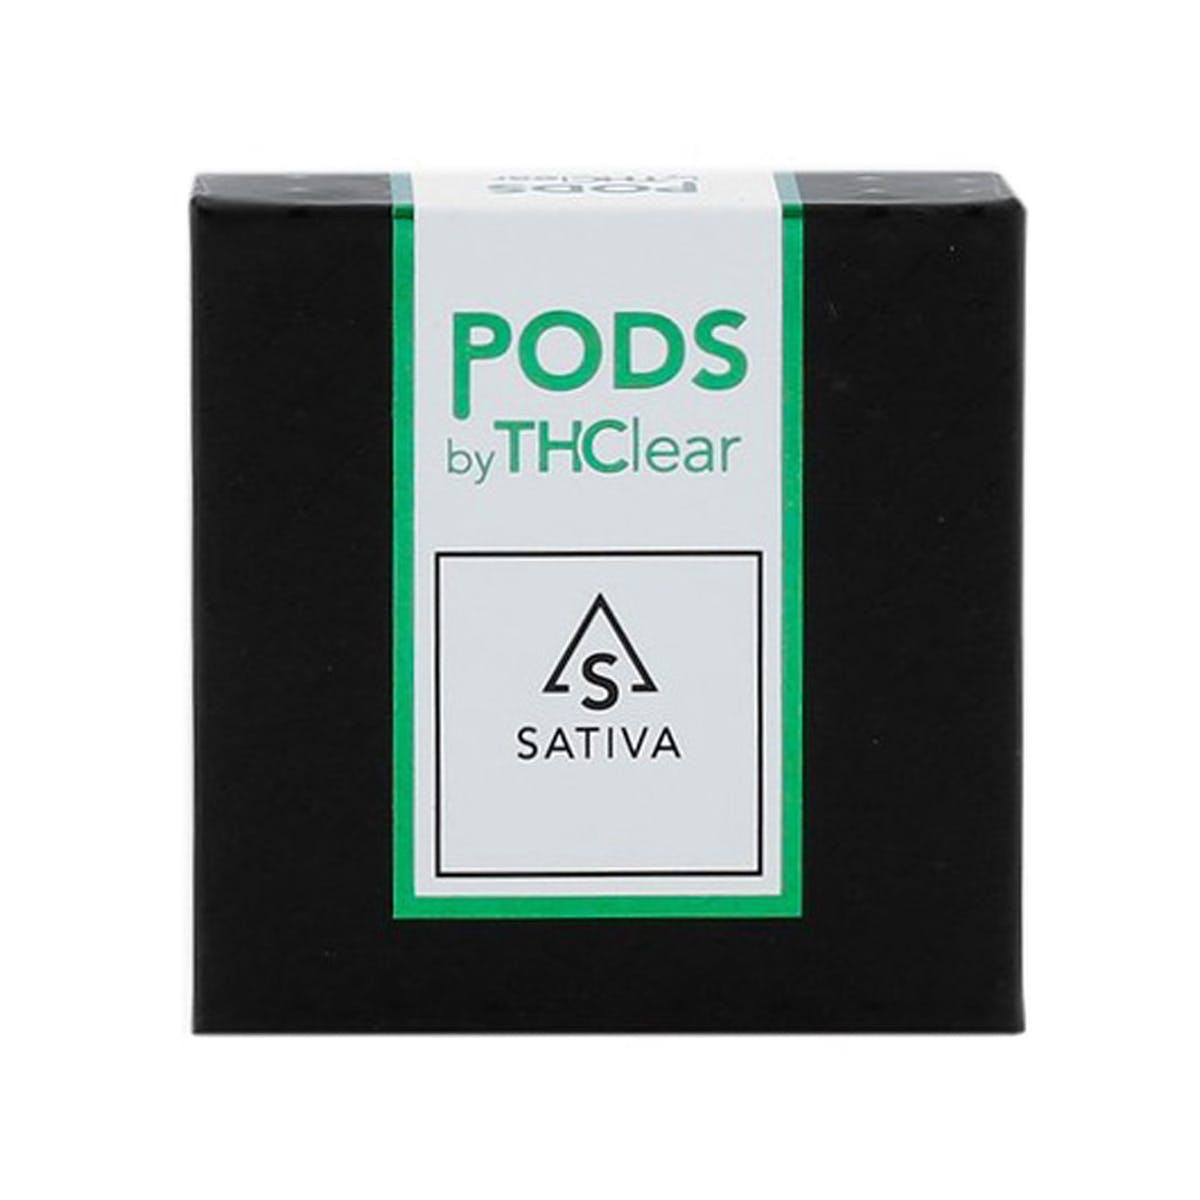 marijuana-dispensaries-ela-space-buds-in-los-angeles-sativa-pods-by-thclear